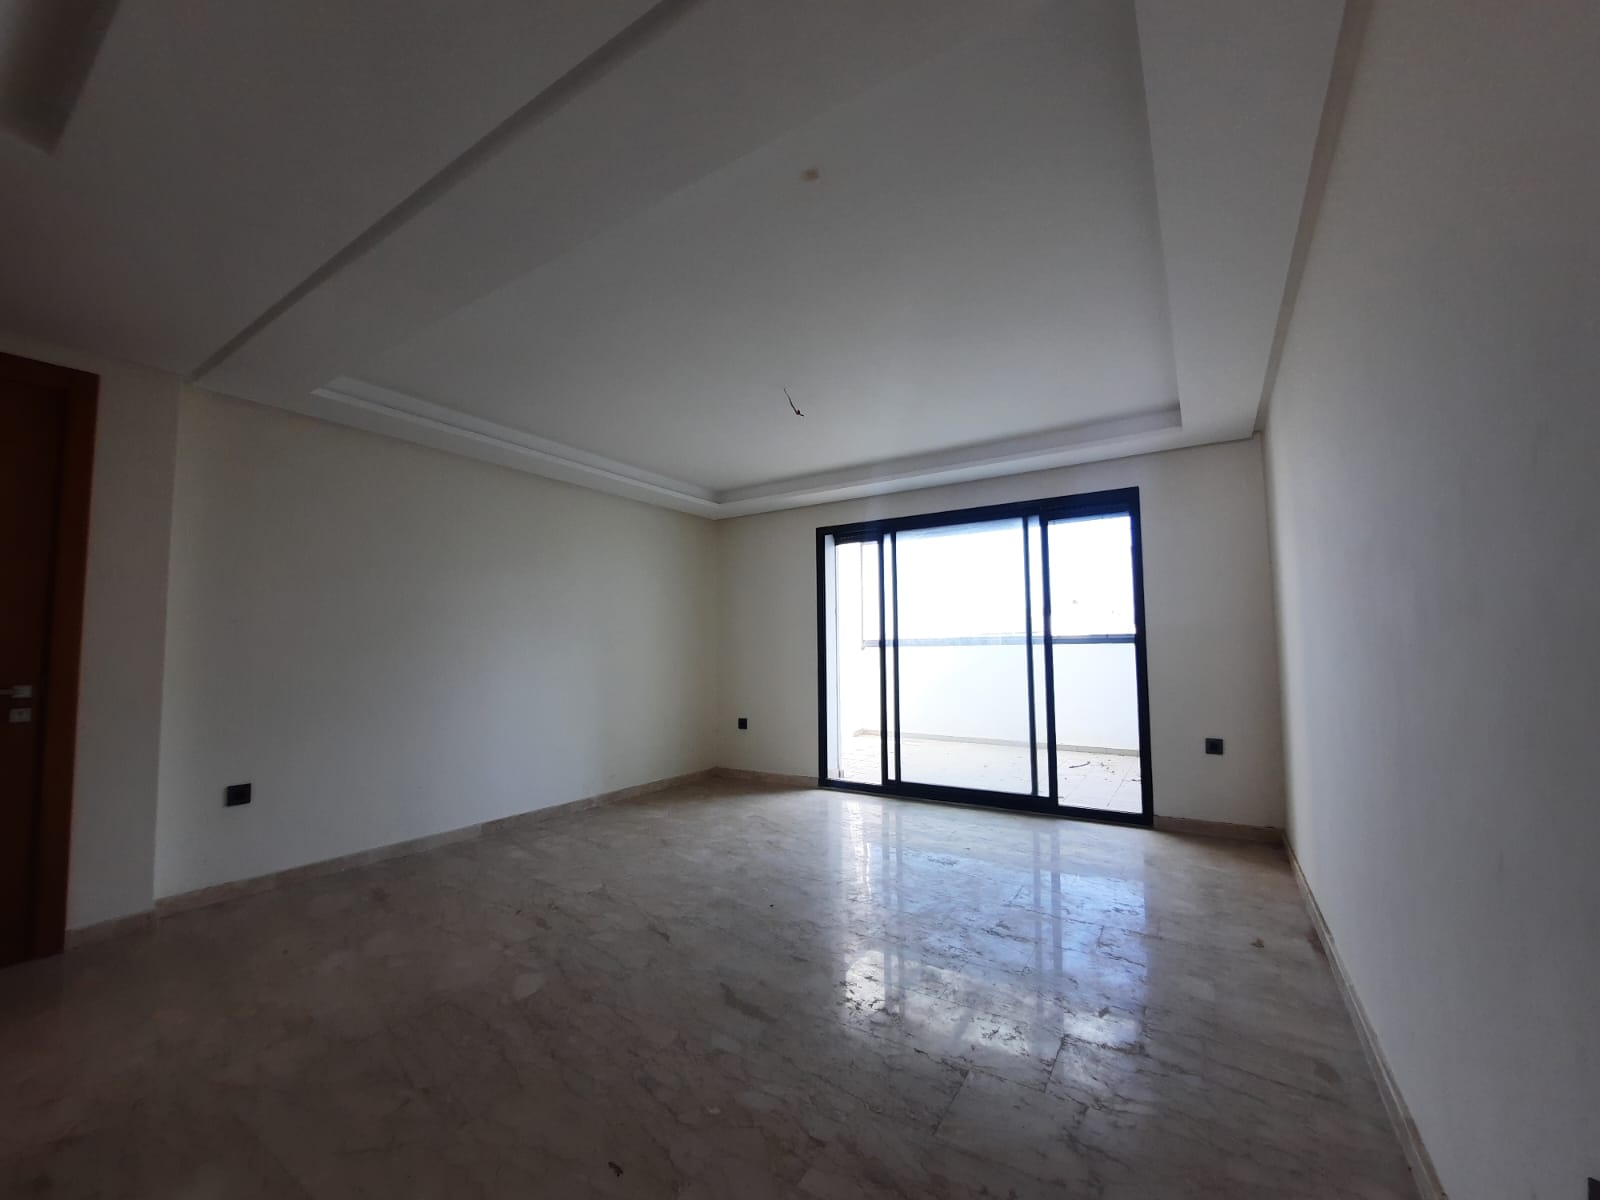 Location appartement 3 chambres  vide